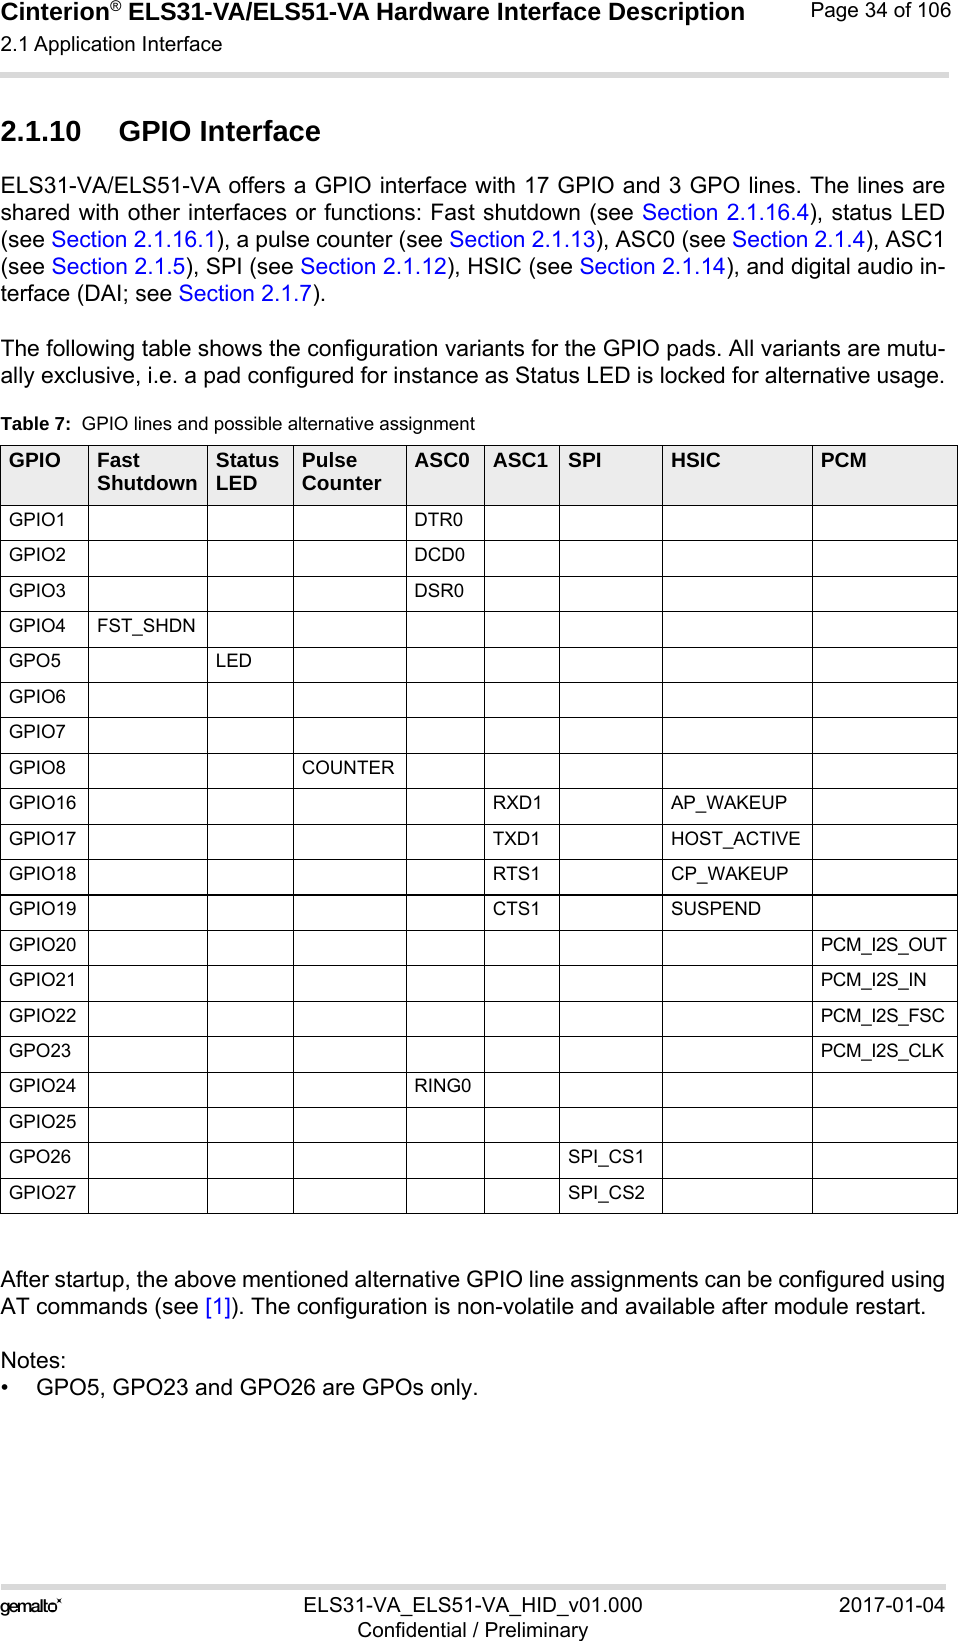 Cinterion® ELS31-VA/ELS51-VA Hardware Interface Description2.1 Application Interface56ELS31-VA_ELS51-VA_HID_v01.000 2017-01-04Confidential / PreliminaryPage 34 of 1062.1.10 GPIO InterfaceELS31-VA/ELS51-VA offers a GPIO interface with 17 GPIO and 3 GPO lines. The lines areshared with other interfaces or functions: Fast shutdown (see Section 2.1.16.4), status LED(see Section 2.1.16.1), a pulse counter (see Section 2.1.13), ASC0 (see Section 2.1.4), ASC1(see Section 2.1.5), SPI (see Section 2.1.12), HSIC (see Section 2.1.14), and digital audio in-terface (DAI; see Section 2.1.7).The following table shows the configuration variants for the GPIO pads. All variants are mutu-ally exclusive, i.e. a pad configured for instance as Status LED is locked for alternative usage.After startup, the above mentioned alternative GPIO line assignments can be configured usingAT commands (see [1]). The configuration is non-volatile and available after module restart.Notes:• GPO5, GPO23 and GPO26 are GPOs only.Table 7:  GPIO lines and possible alternative assignmentGPIO Fast Shutdown Status LED Pulse Counter ASC0 ASC1 SPI HSIC PCMGPIO1 DTR0GPIO2 DCD0GPIO3 DSR0GPIO4 FST_SHDNGPO5 LEDGPIO6GPIO7GPIO8 COUNTERGPIO16 RXD1 AP_WAKEUPGPIO17 TXD1 HOST_ACTIVEGPIO18 RTS1 CP_WAKEUPGPIO19 CTS1 SUSPENDGPIO20 PCM_I2S_OUTGPIO21 PCM_I2S_INGPIO22 PCM_I2S_FSCGPO23 PCM_I2S_CLKGPIO24 RING0GPIO25GPO26 SPI_CS1GPIO27 SPI_CS2